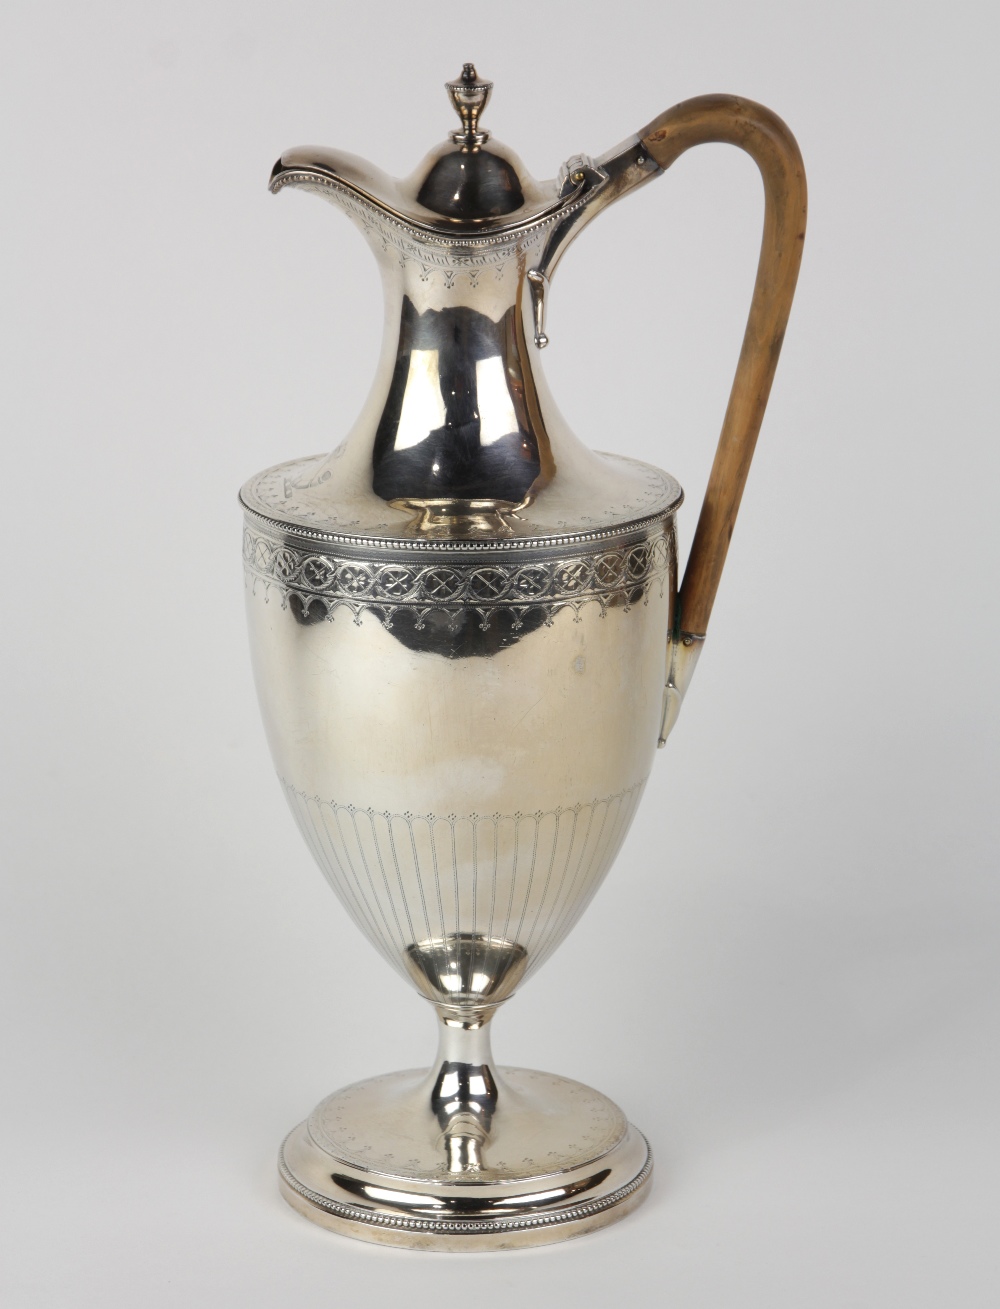 George III sterling silver jug, London 1785, Hester Bateman, having an ovoid form, with an urn